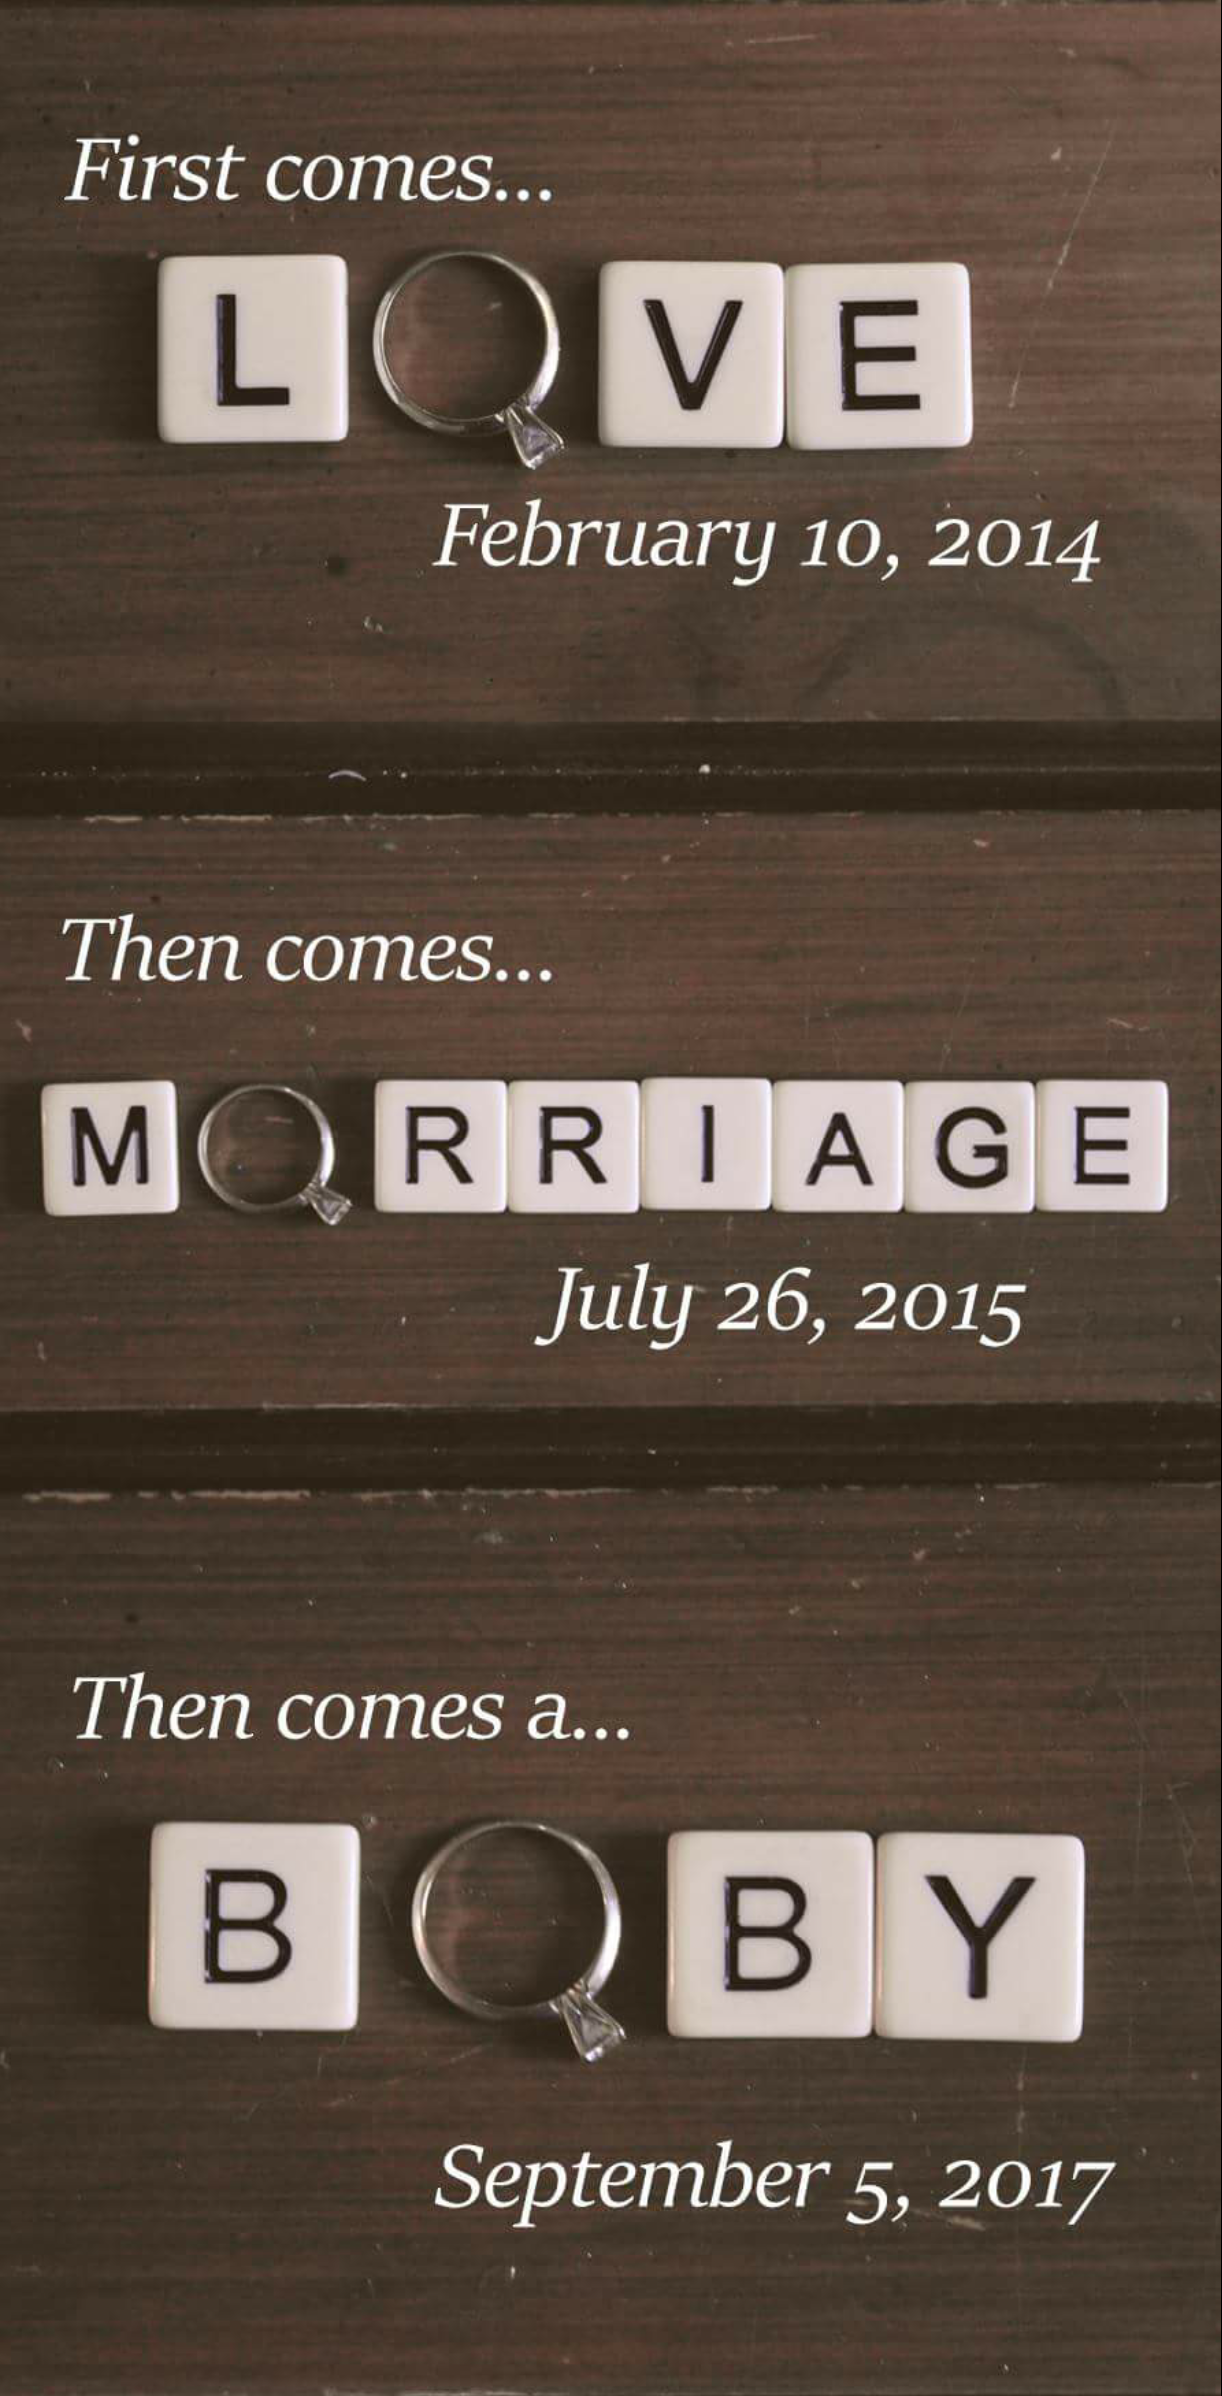 love boby - First comes... Love Then comes... Morriage Then comes a... Bo By